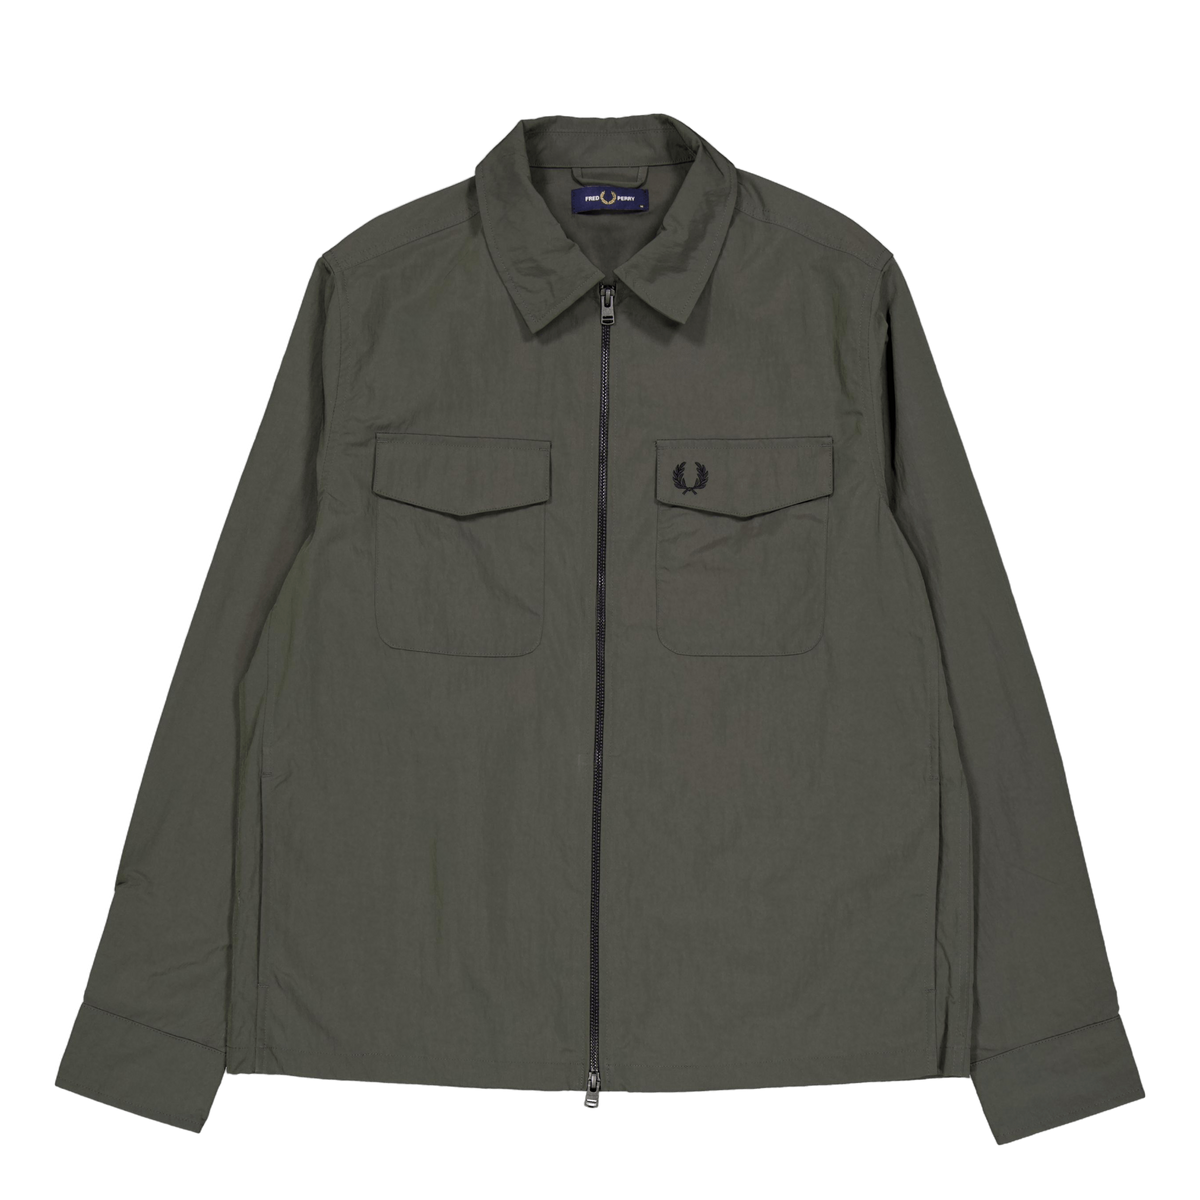 Fred Perry Zip Overshirt 638